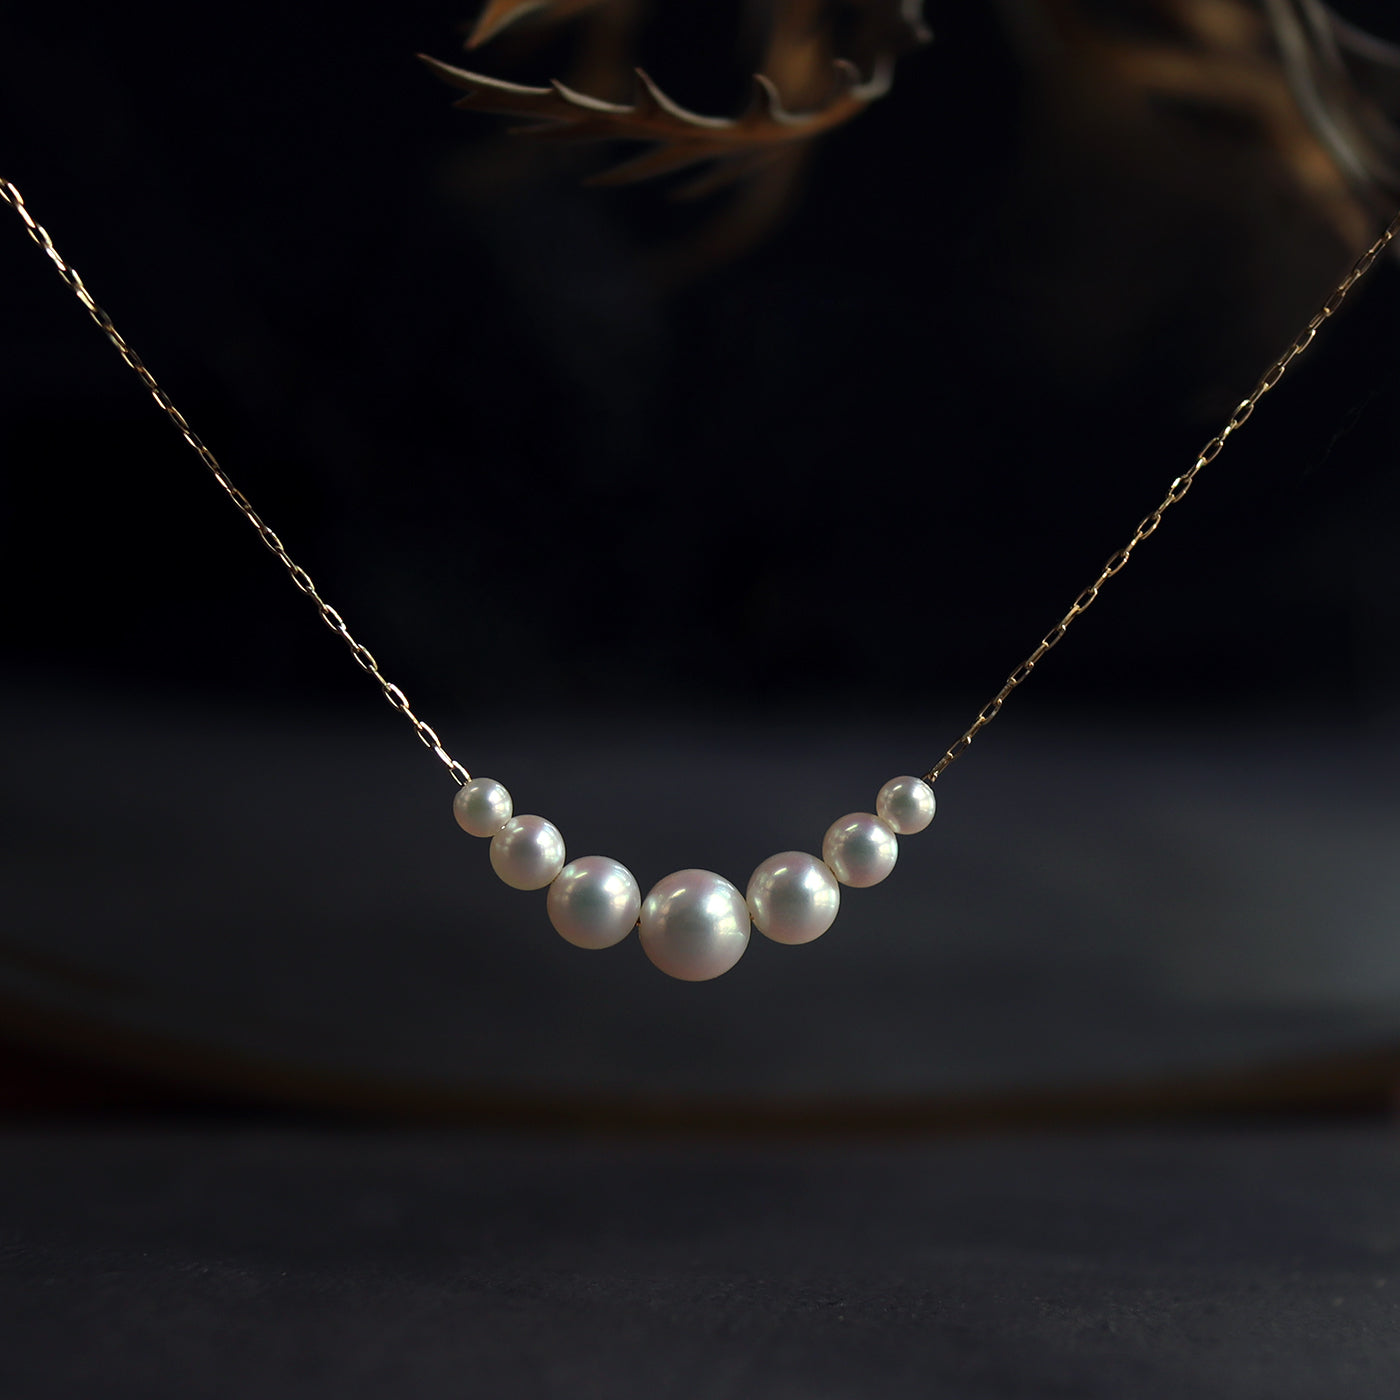 Graduated Pearl Chain Necklace - アコヤパール